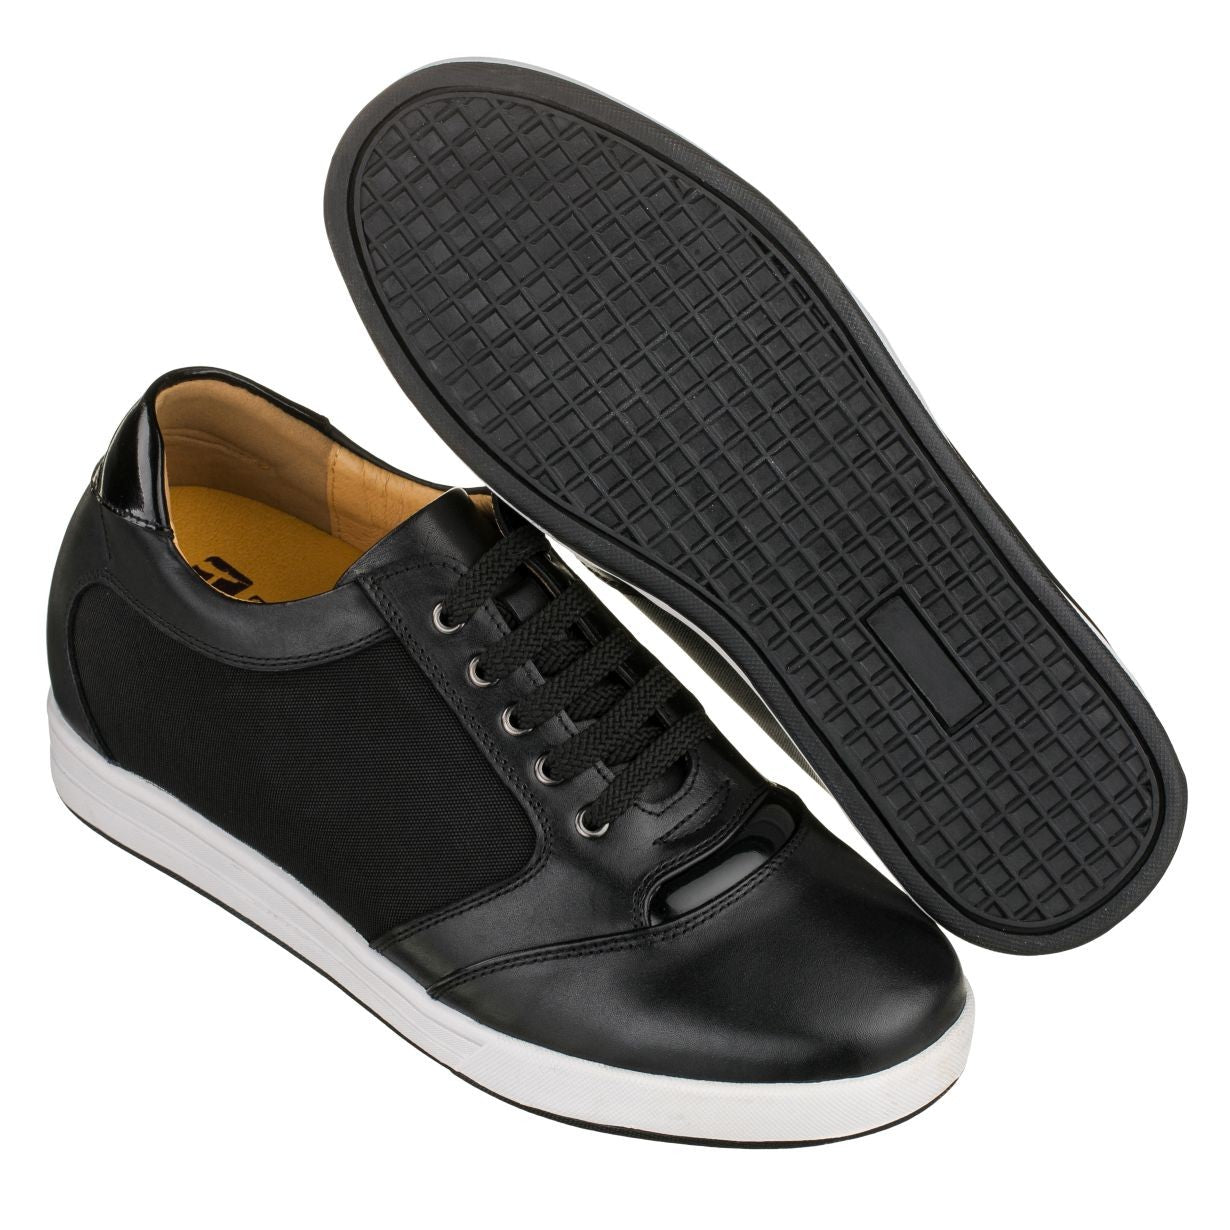 Elevator shoes height increase TOTO 3.2-Inch Taller Men's Elevator Sneakers